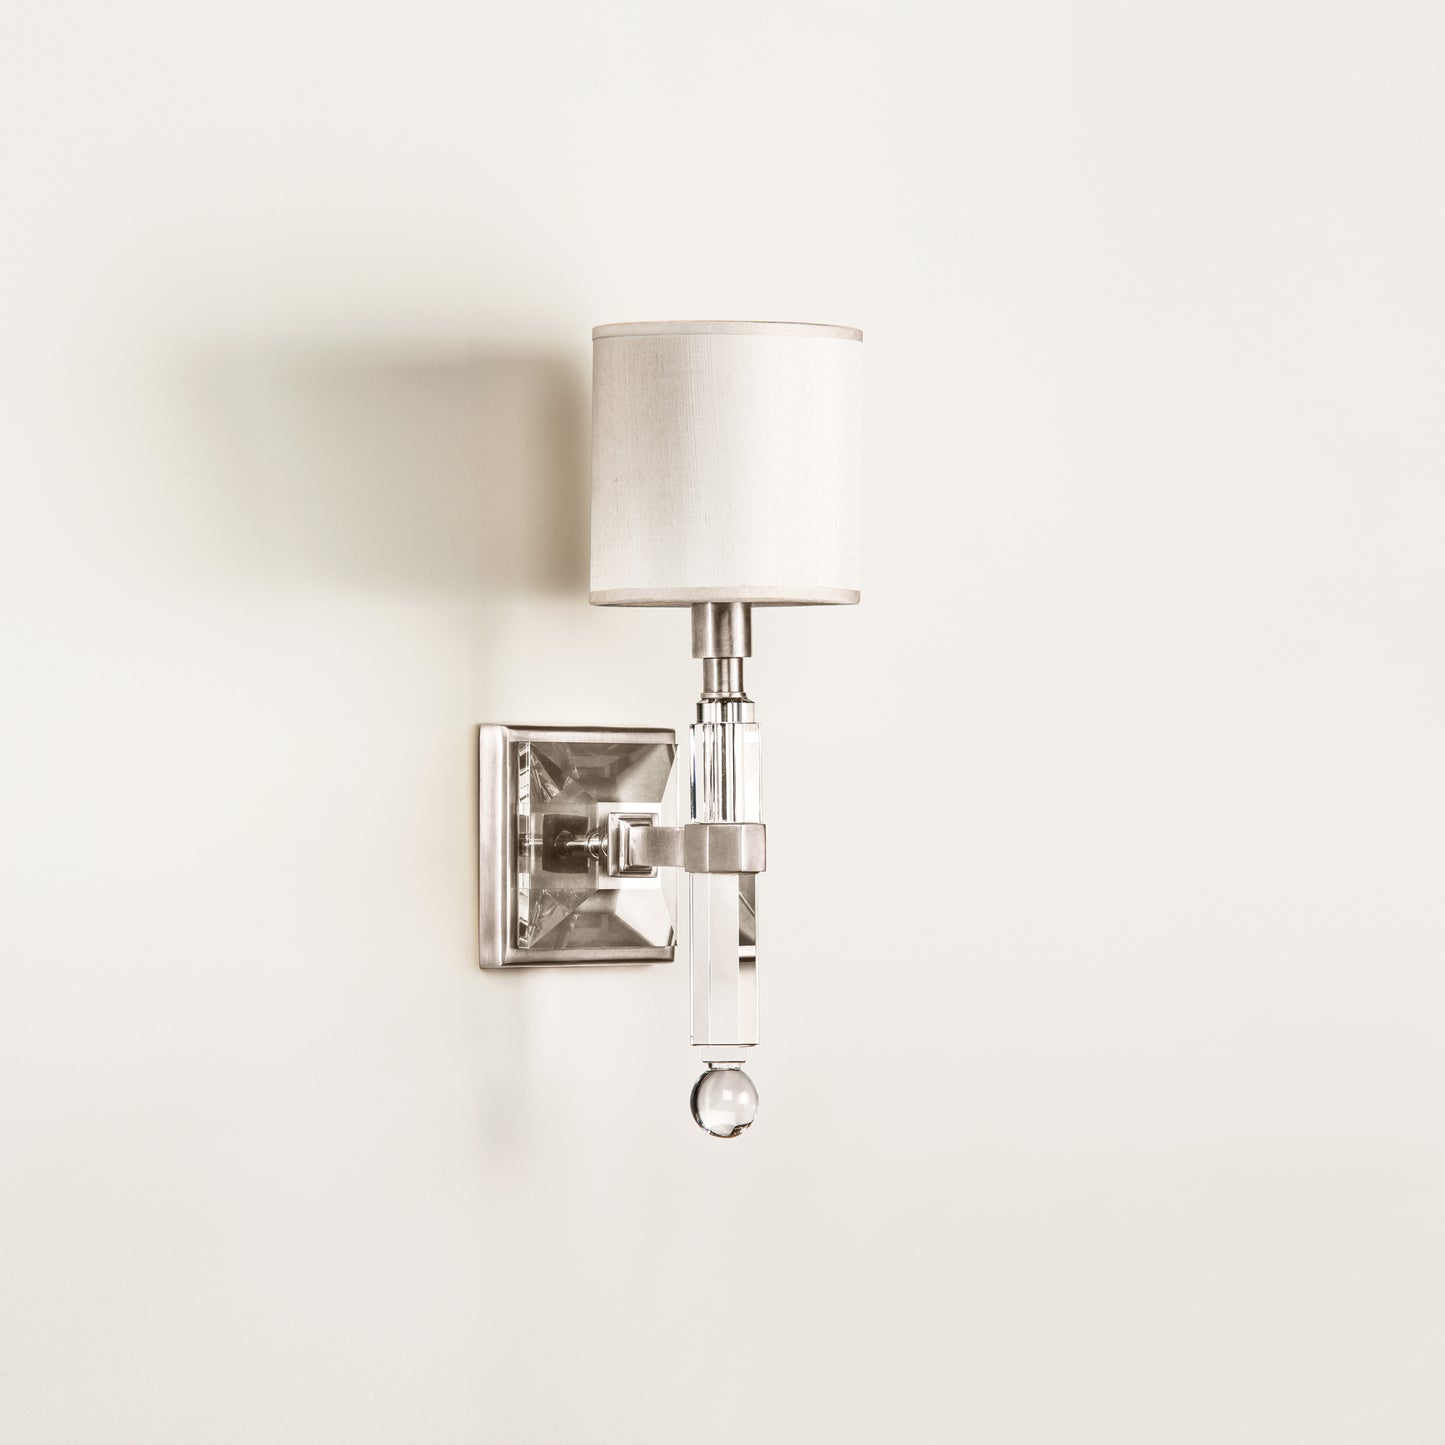 Crystal and polished nickel wall sconce.